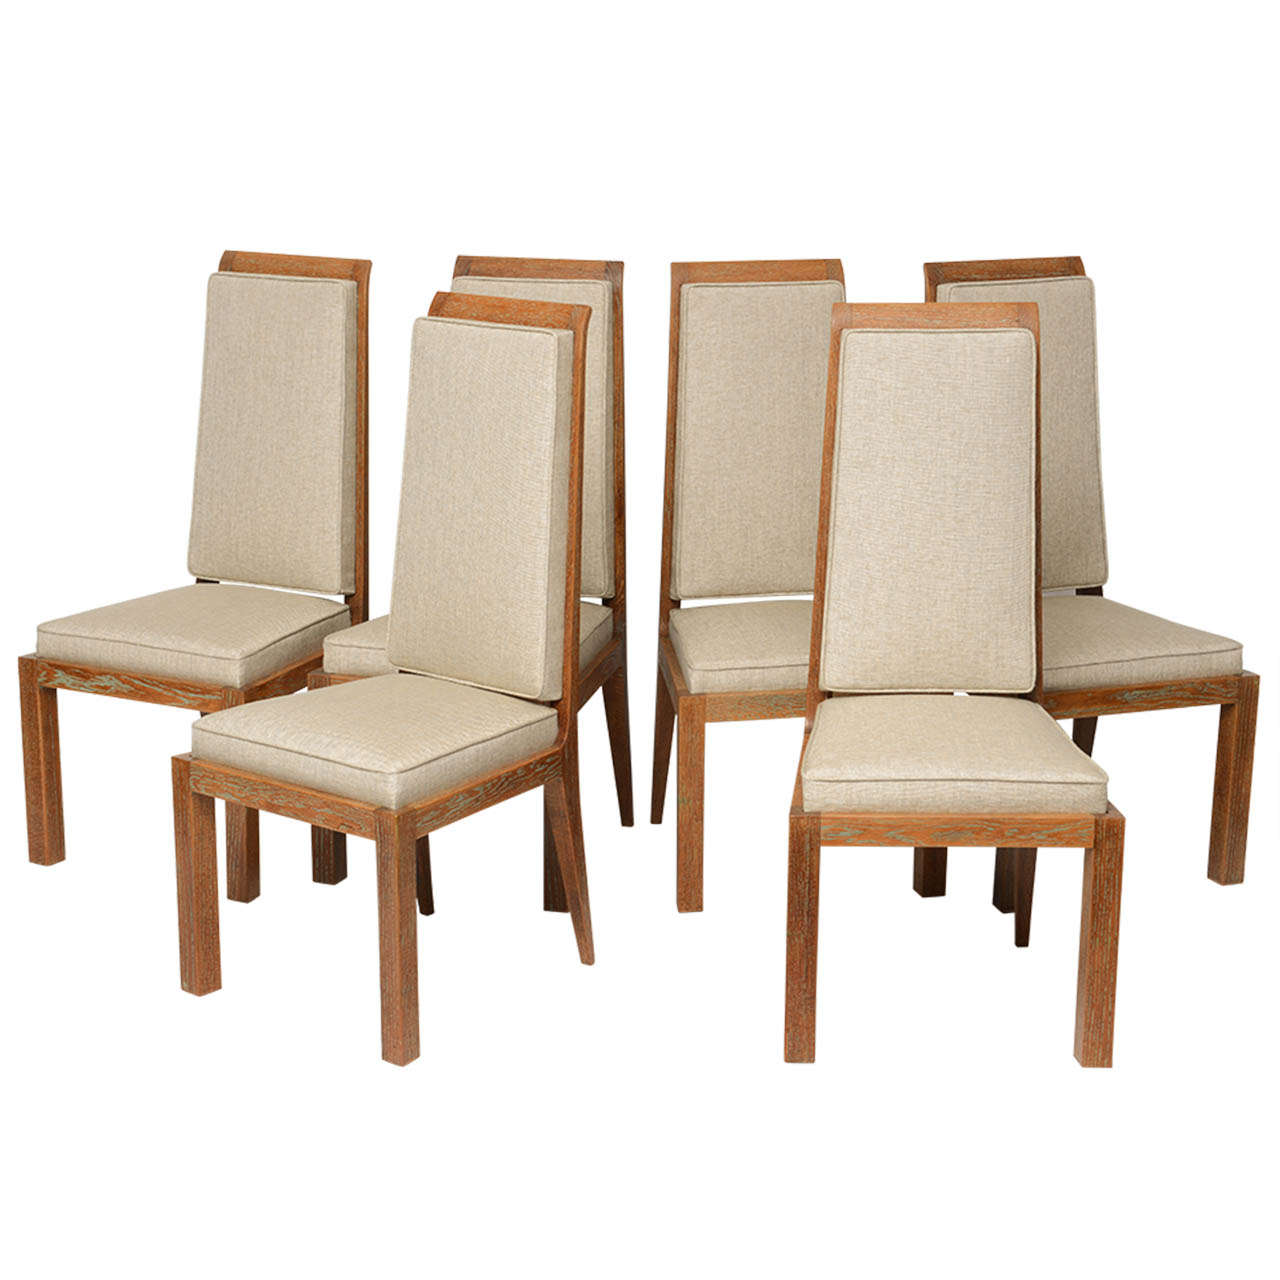 Set of six Art Deco chairs, perfectly refinished, in cerused oak, refined and elegant proportions.
The shape is refined, the back feet are designed following an oblique line.
Very high-end cubist design, these chairs are made of solid cerused oak,